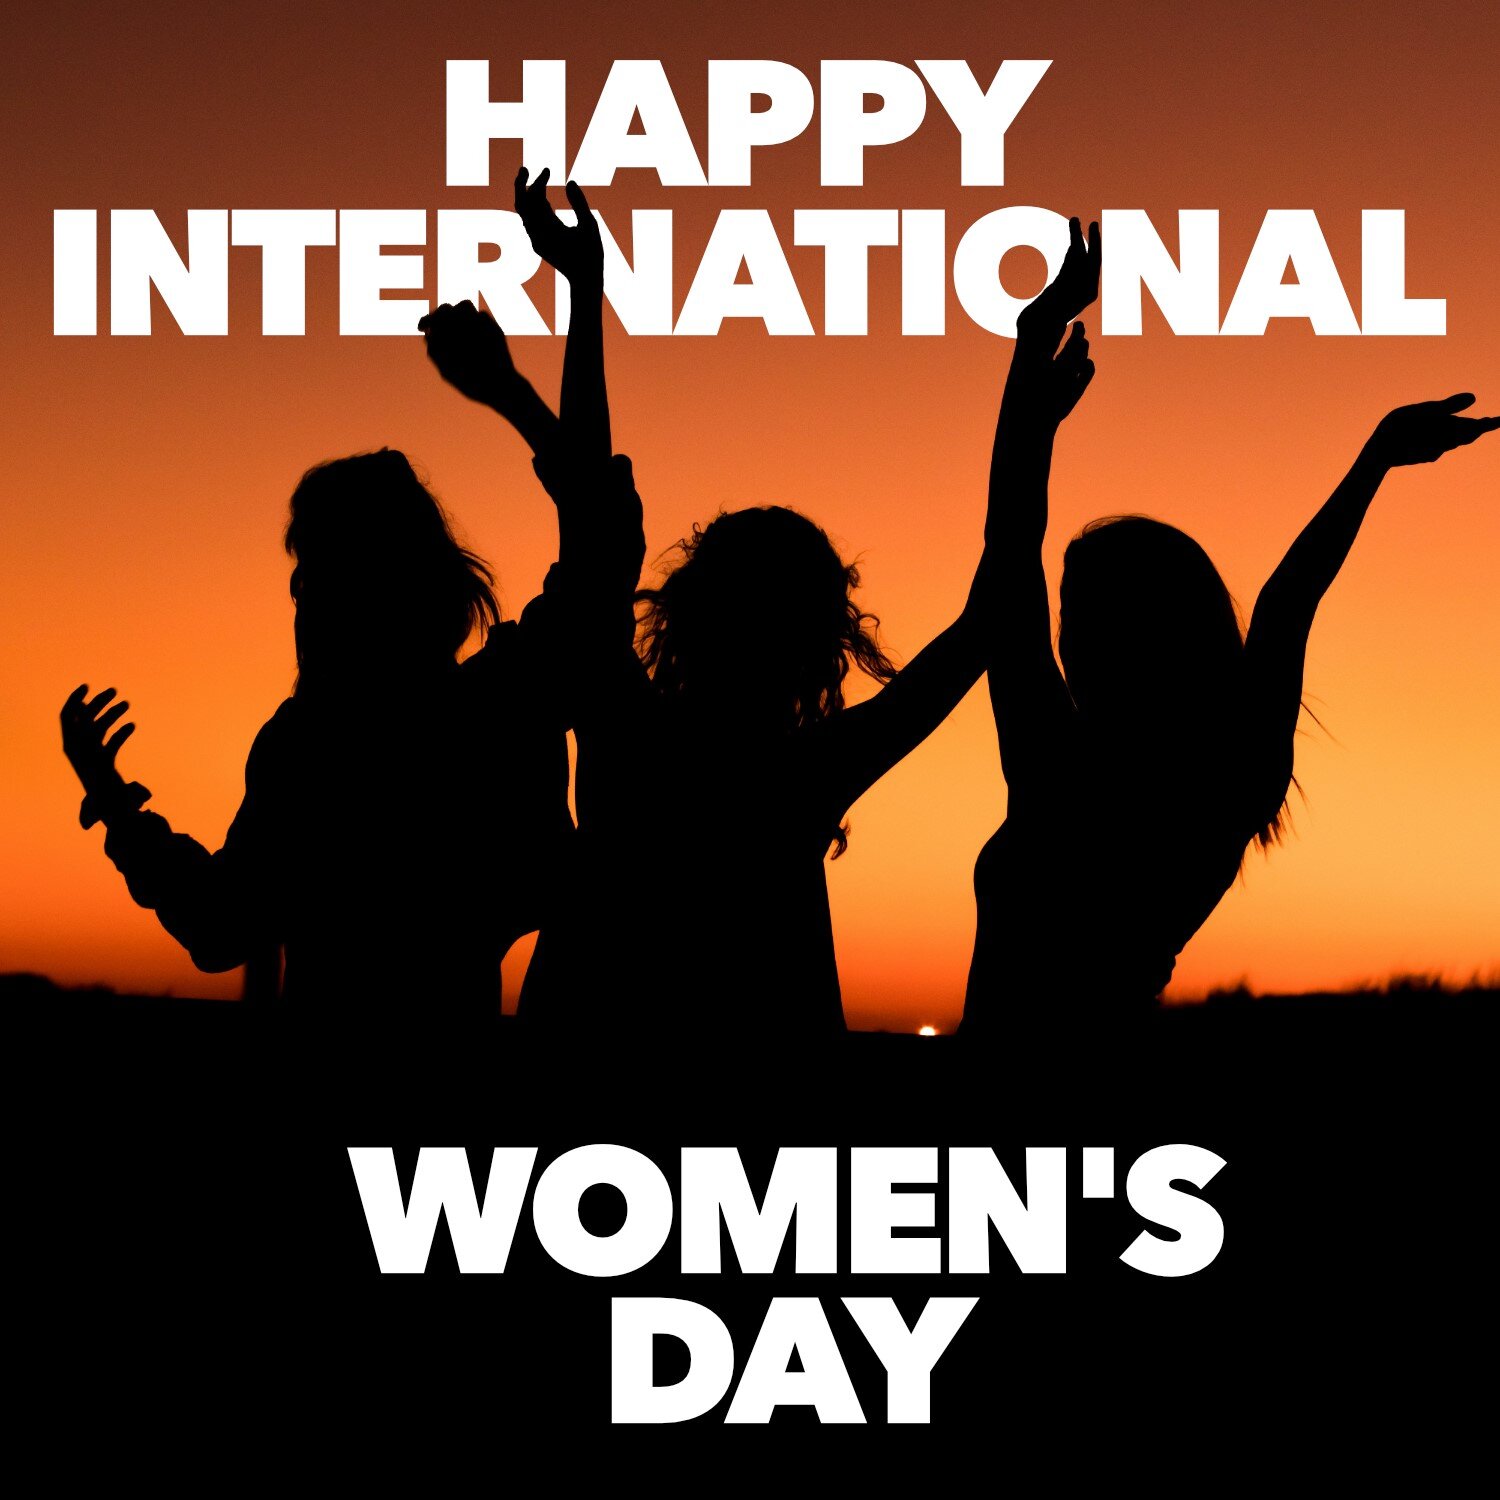 Happy International Women's Day! A special thank you to all the women trailblazing and uplifting everyone around them as we continue our mission of empowering women and eliminating racism. 

Who are the women in your life who've empowered, inspired, 